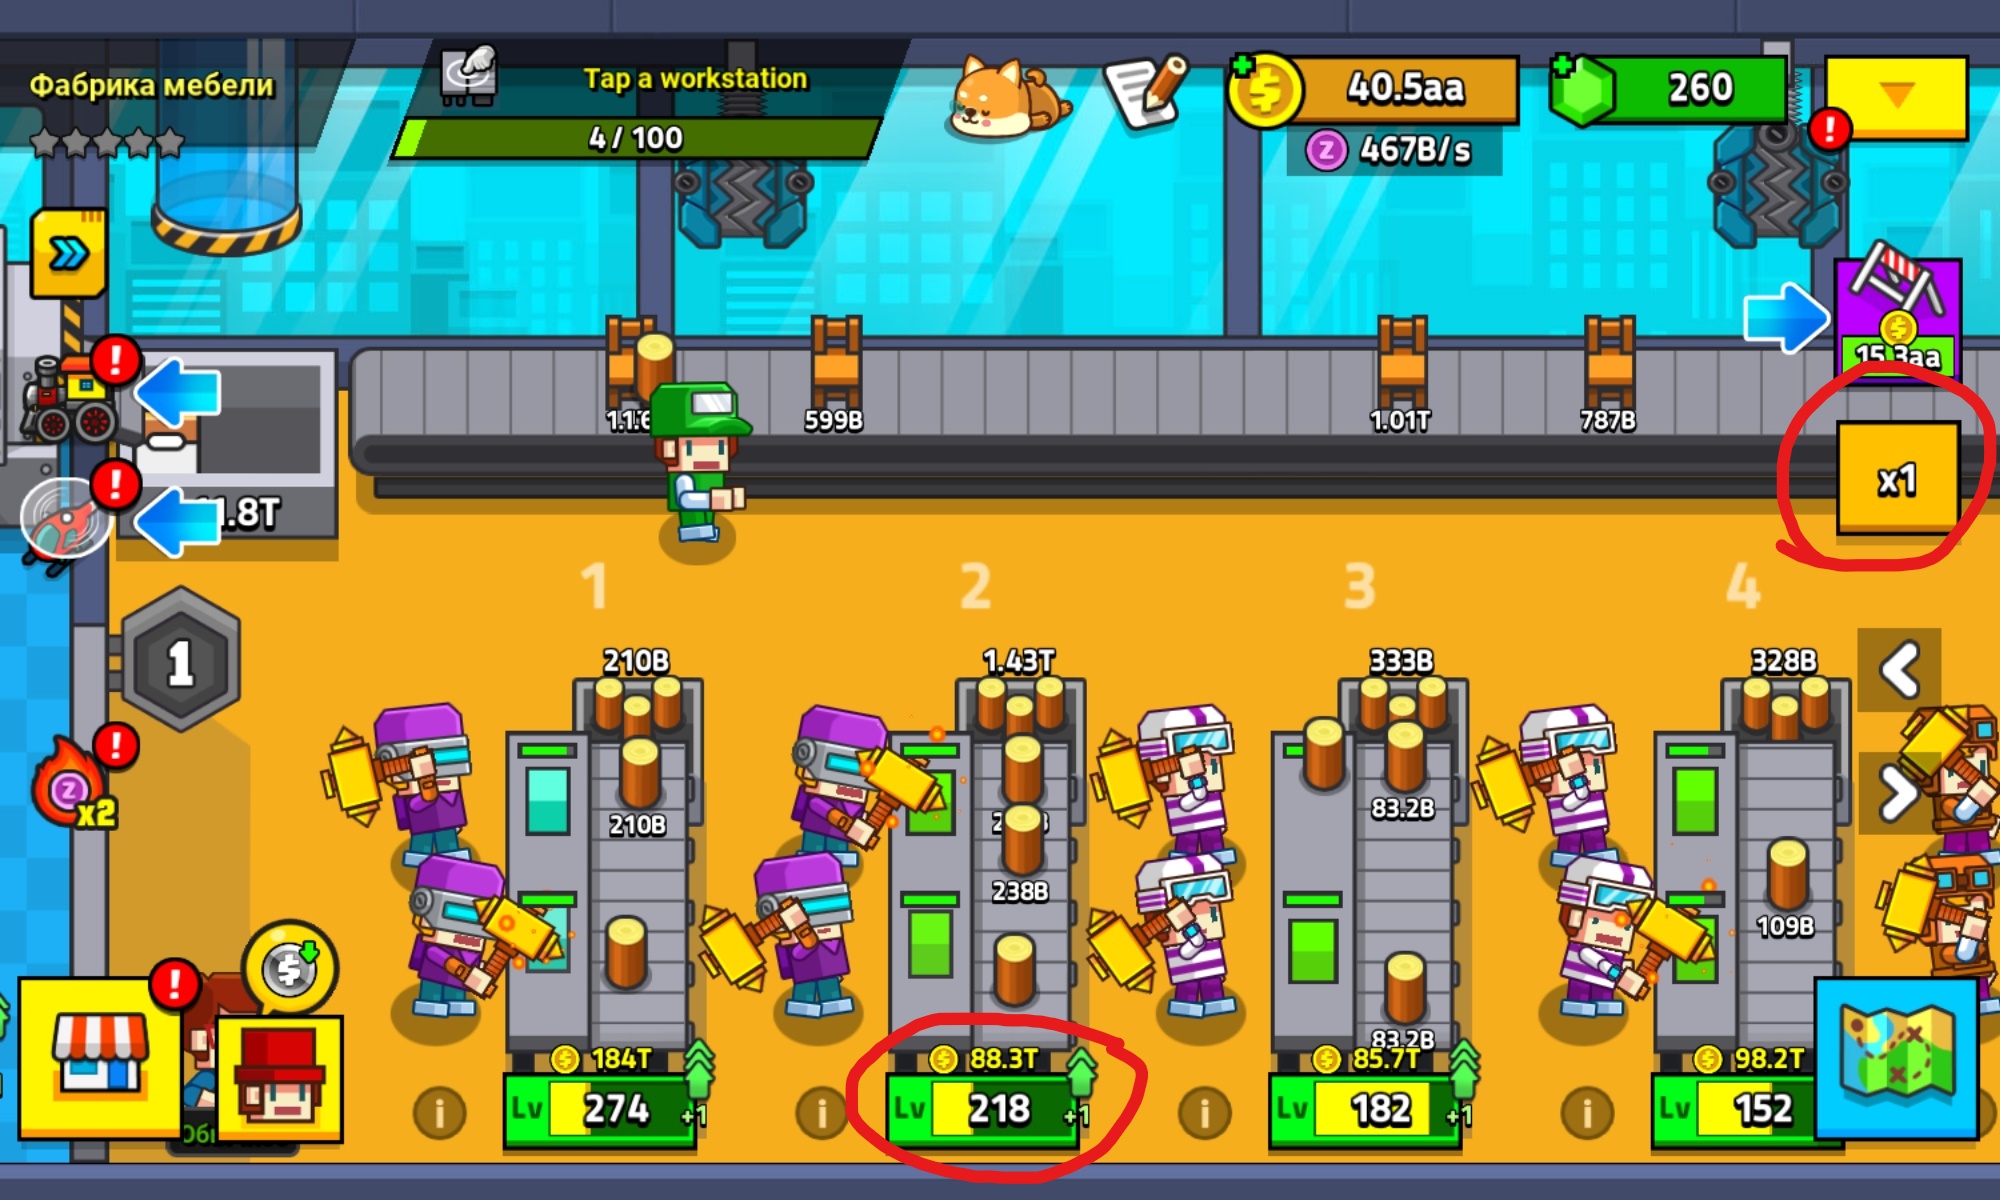 How do I implement a multiplier to buy multiple levels at once?